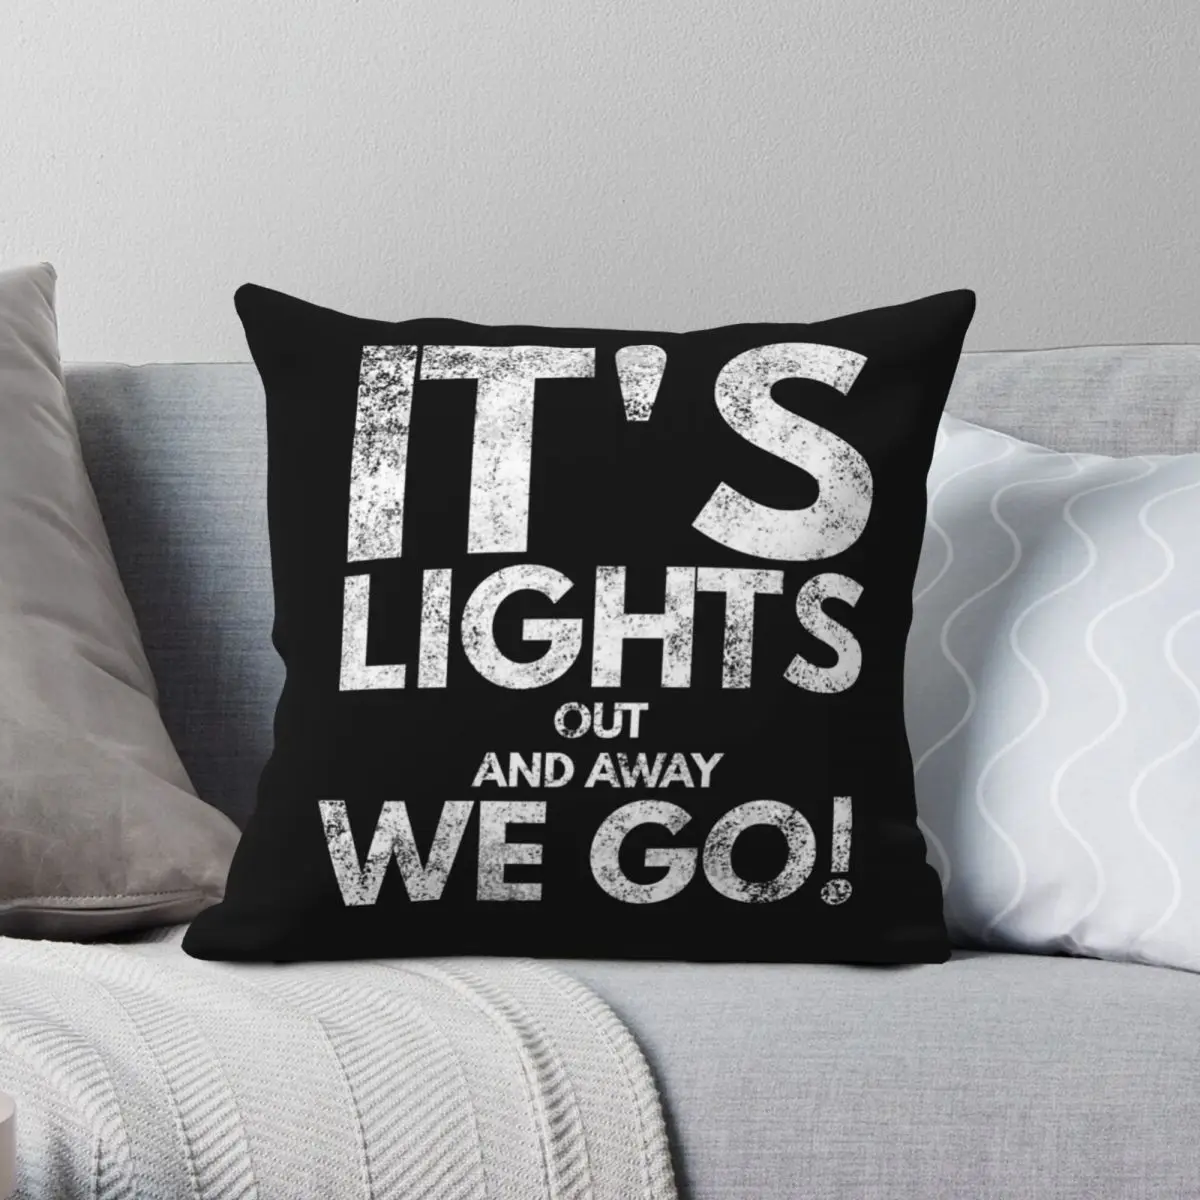 

It's Lights Out Away We Go Square Pillowcase Polyester Linen Velvet Pattern Zip Decor Throw Pillow Case Home Cushion Cover